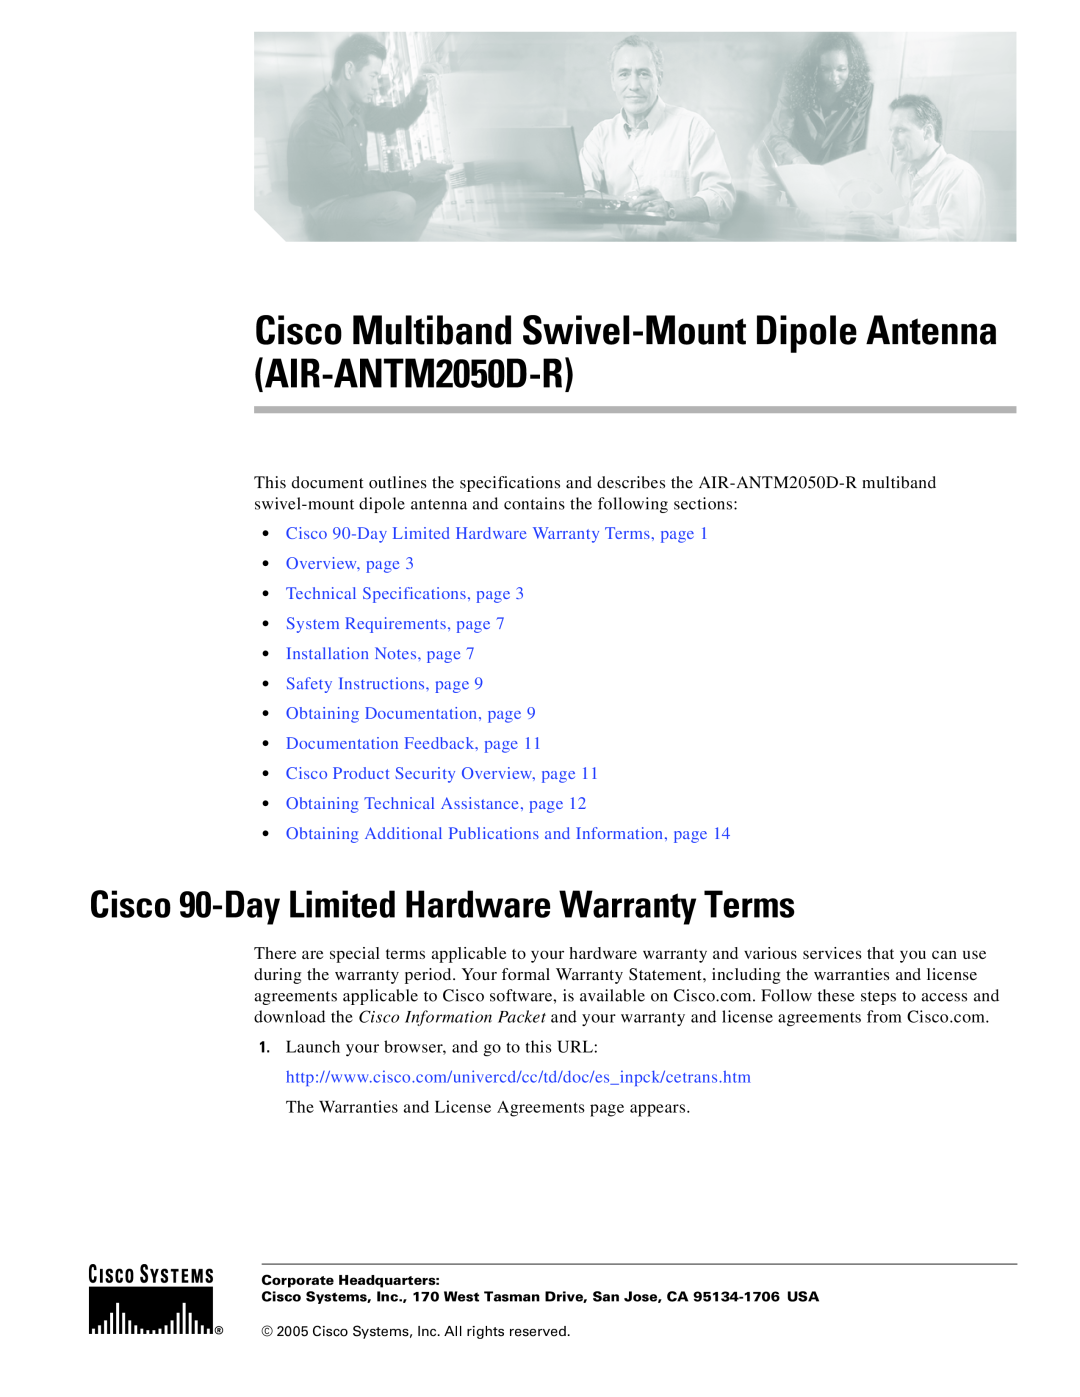 Cisco Systems AIR-ANTM2050D-R warranty Cisco 90-DayLimited Hardware Warranty Terms, System Requirements, page 